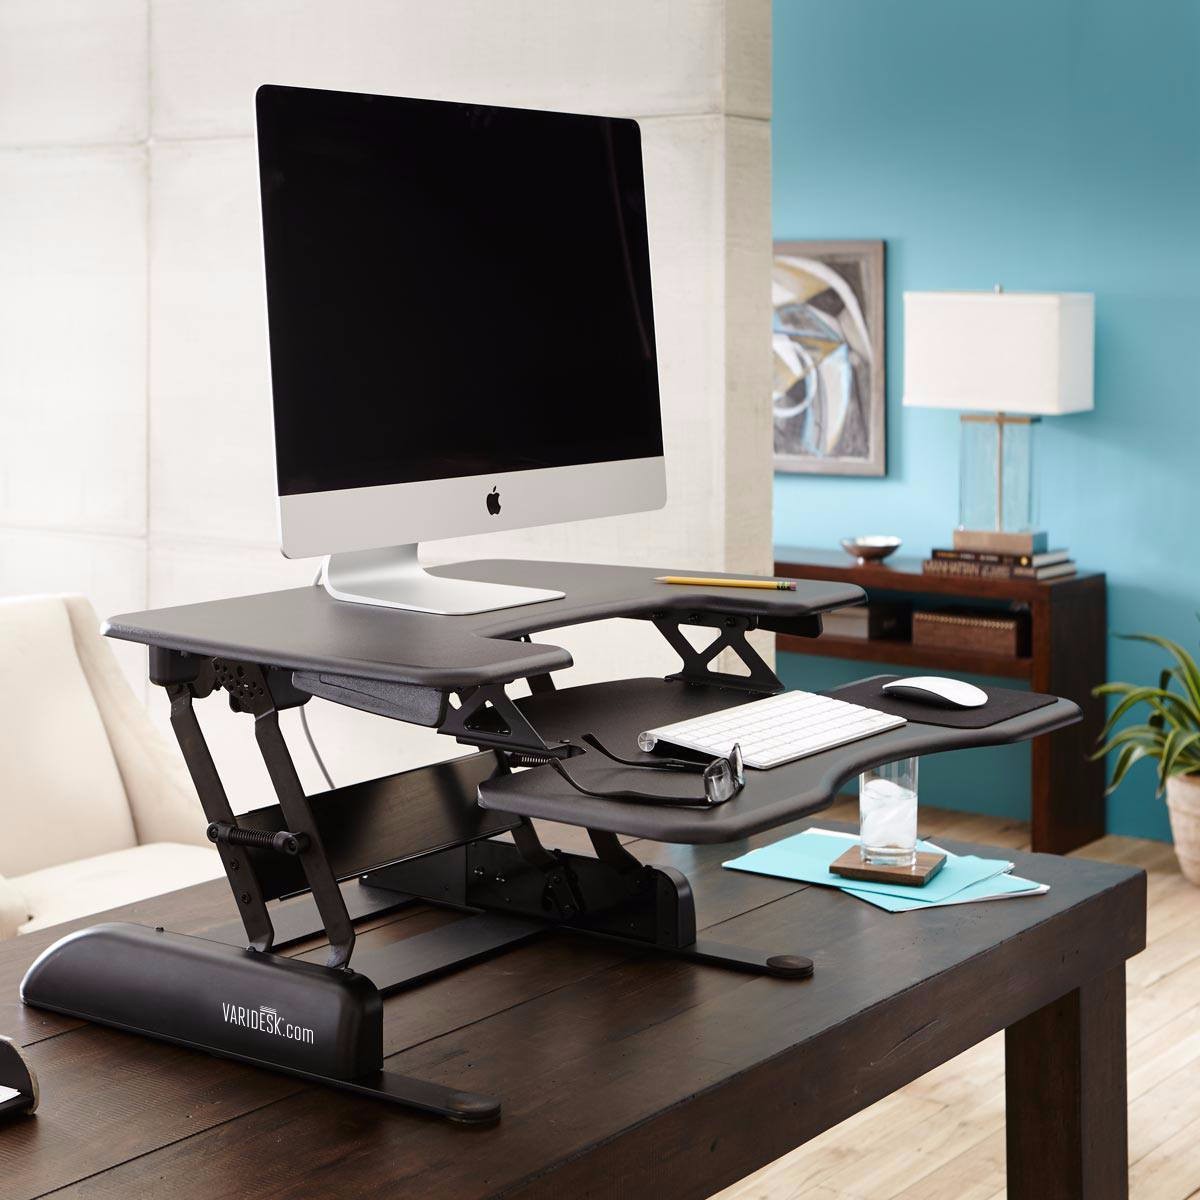 Good for circulation and budget: A comparison of height-adjustable desk tops